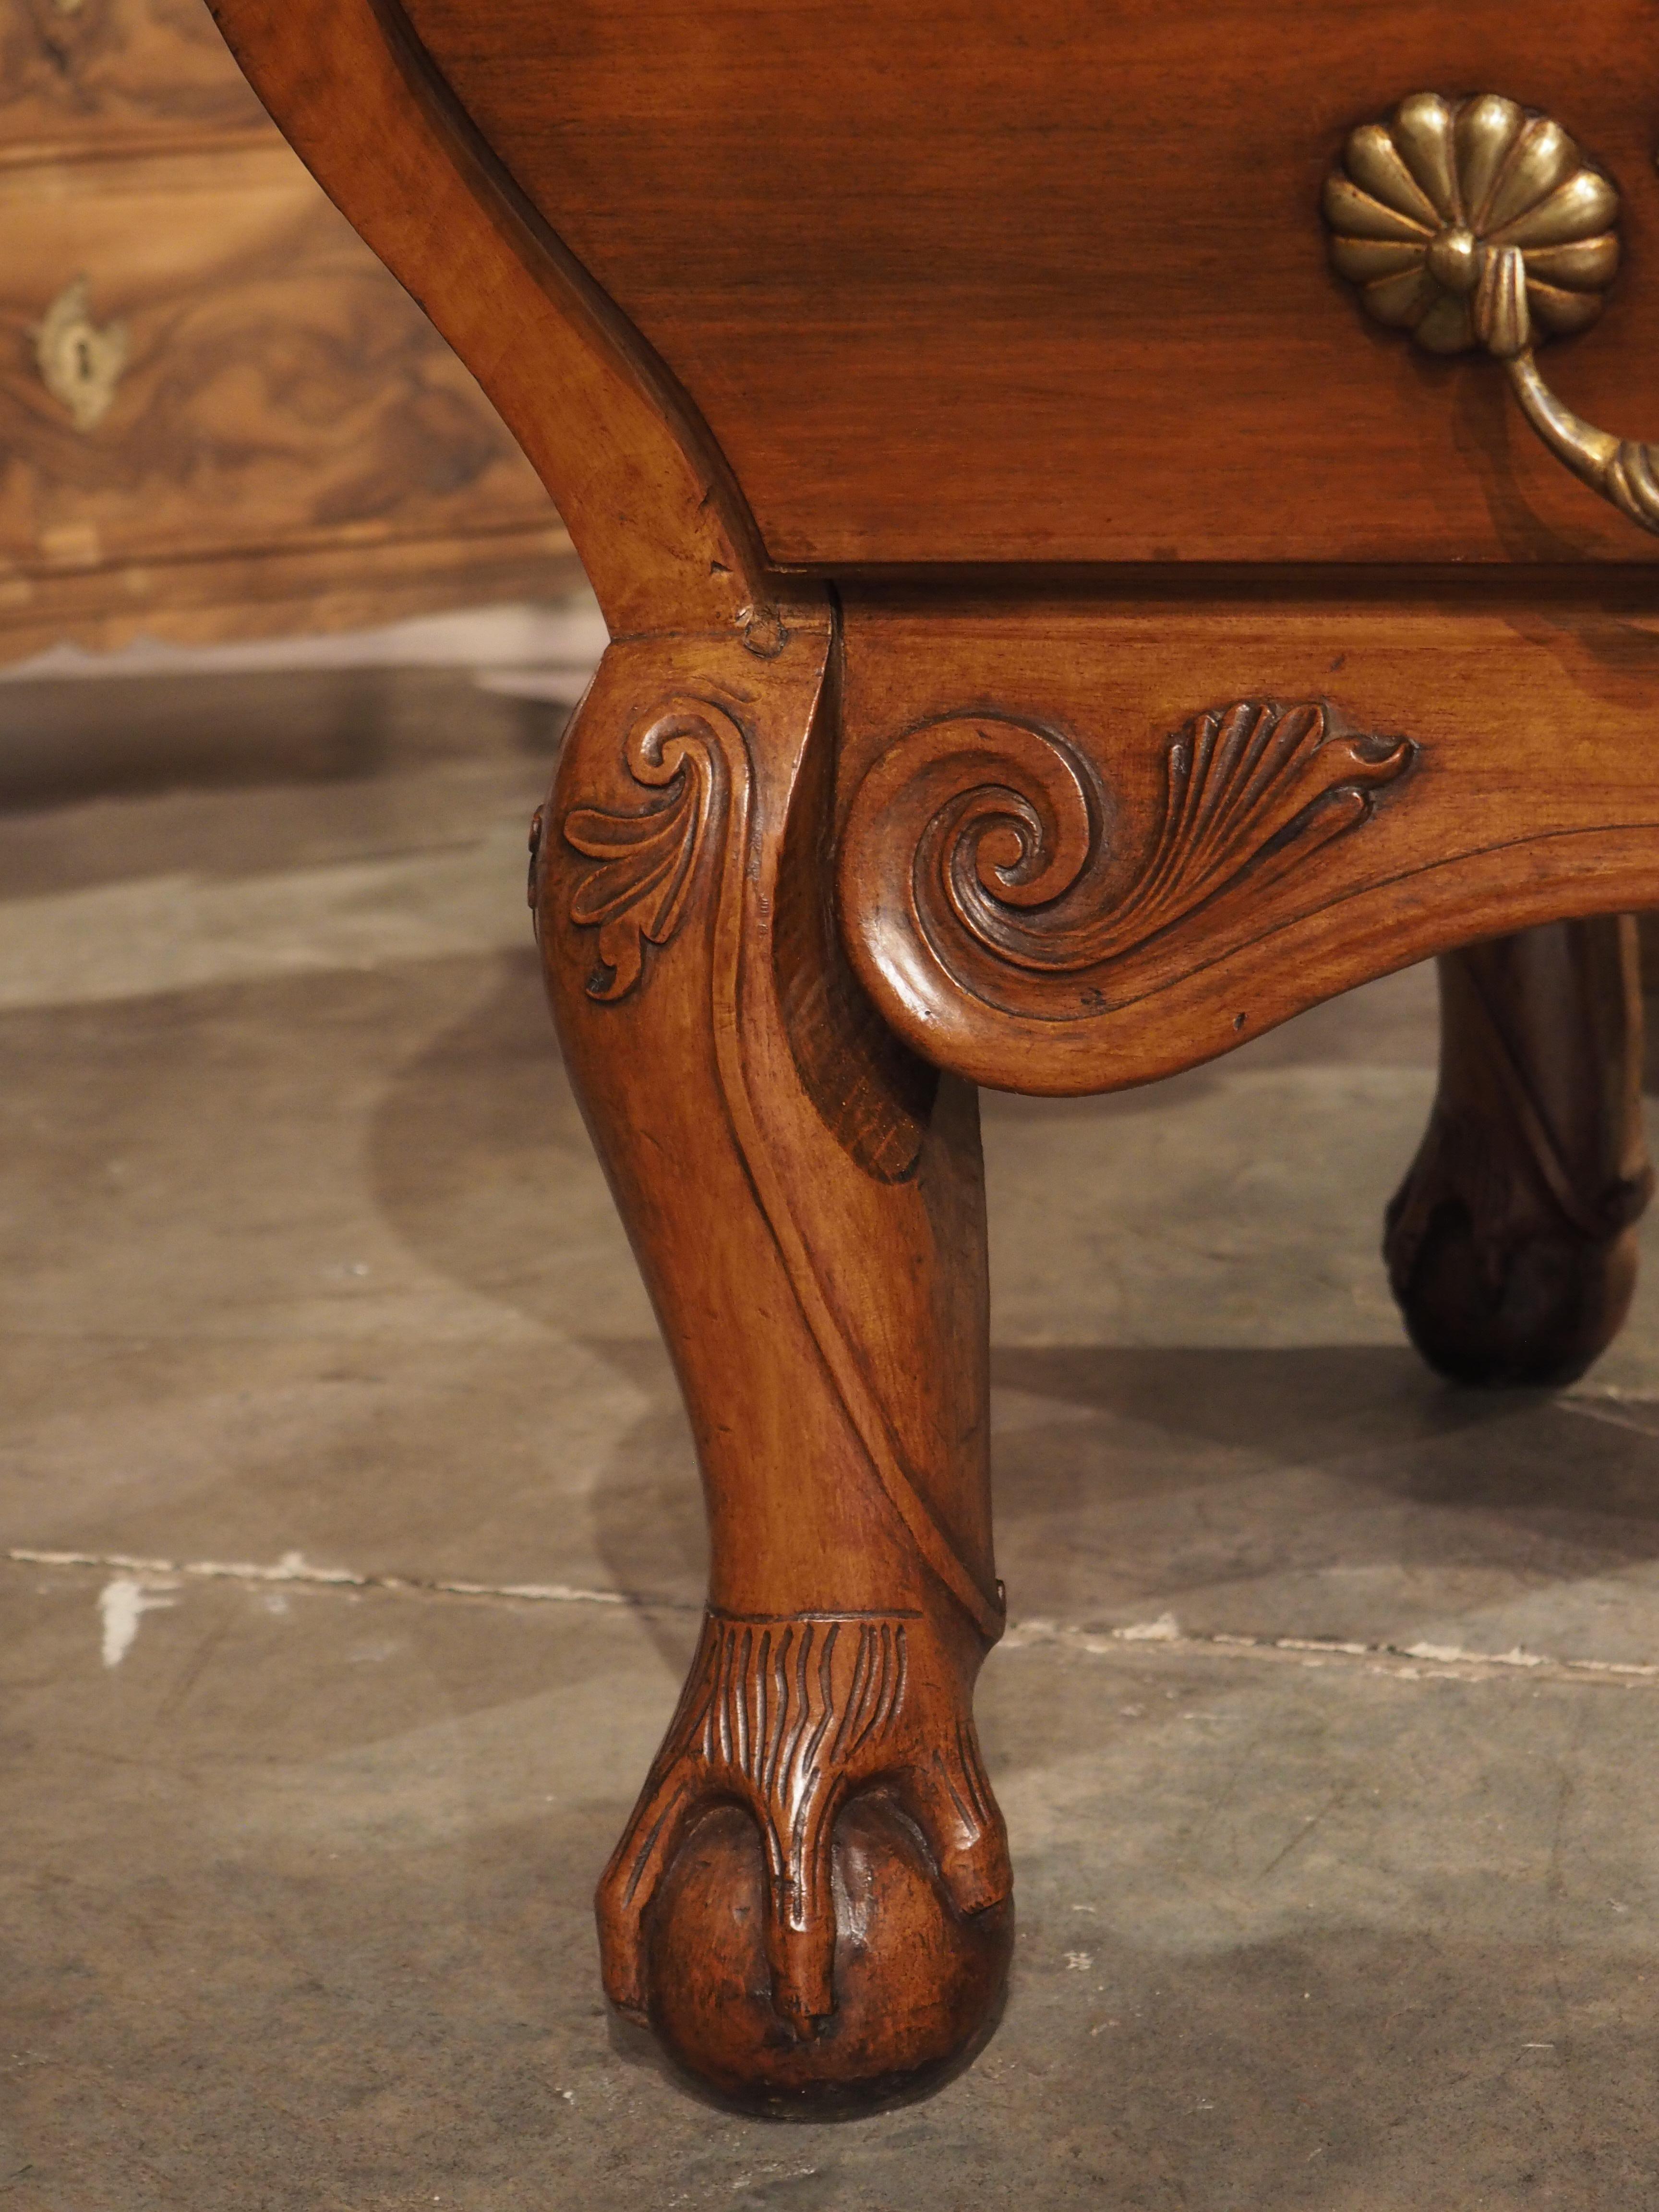 Hand-Carved Rare 18th Century French Walnut Commode “Angouleme” with Stamped Bronze Hardware For Sale